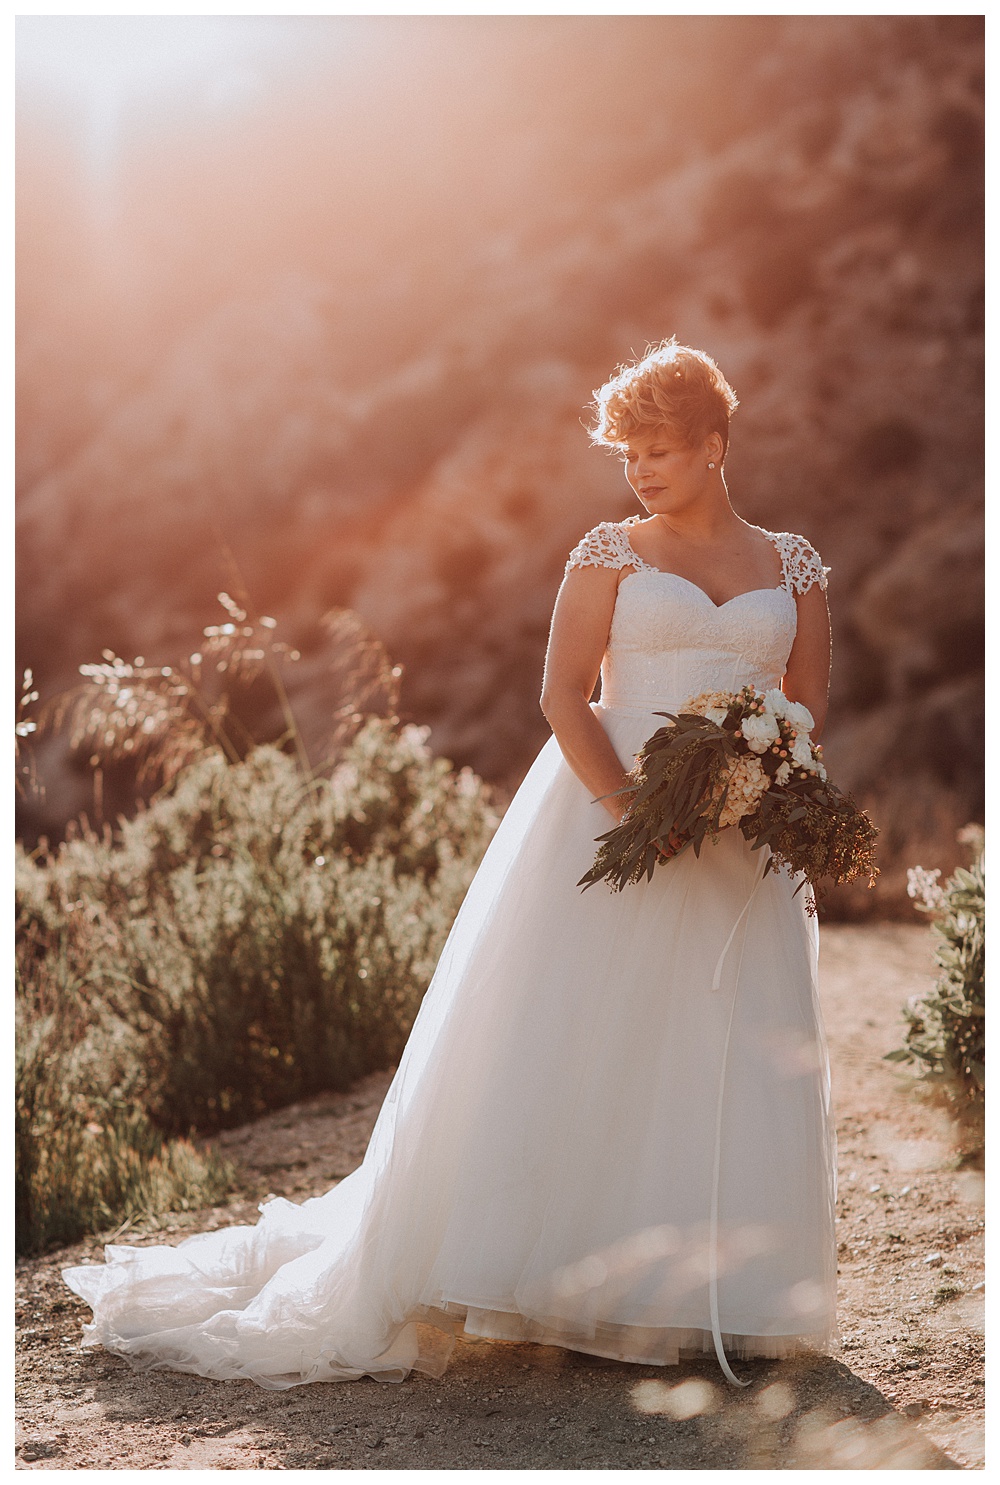 Mountain Elopement Photography in Los Angeles, CA